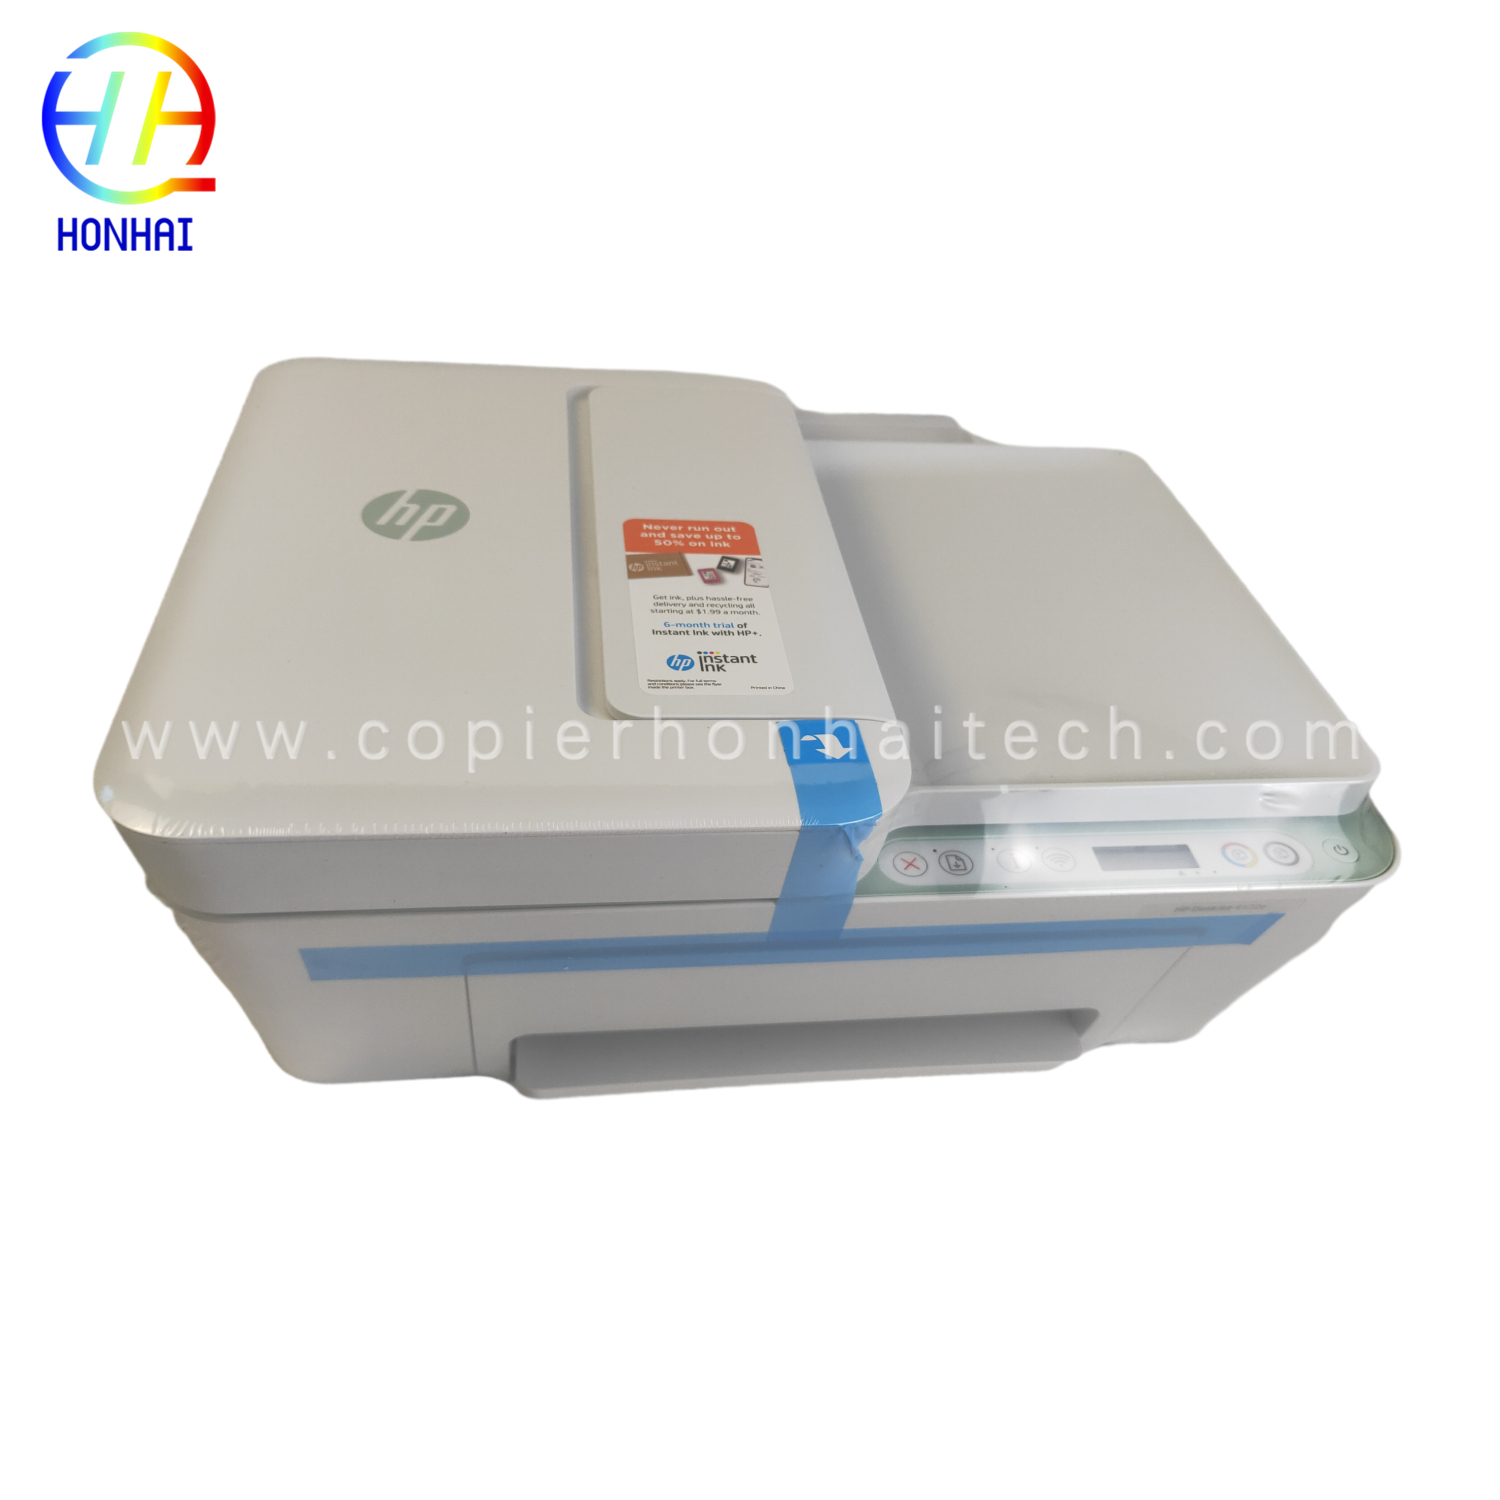 https://www.copierhonhaitech.com/original-new-wireless-printer-for-hp-deskjet-4122e-all-in-one-printer-scan-and-copy-home-office-students-and-home- stampante-26q96a-prodotto/